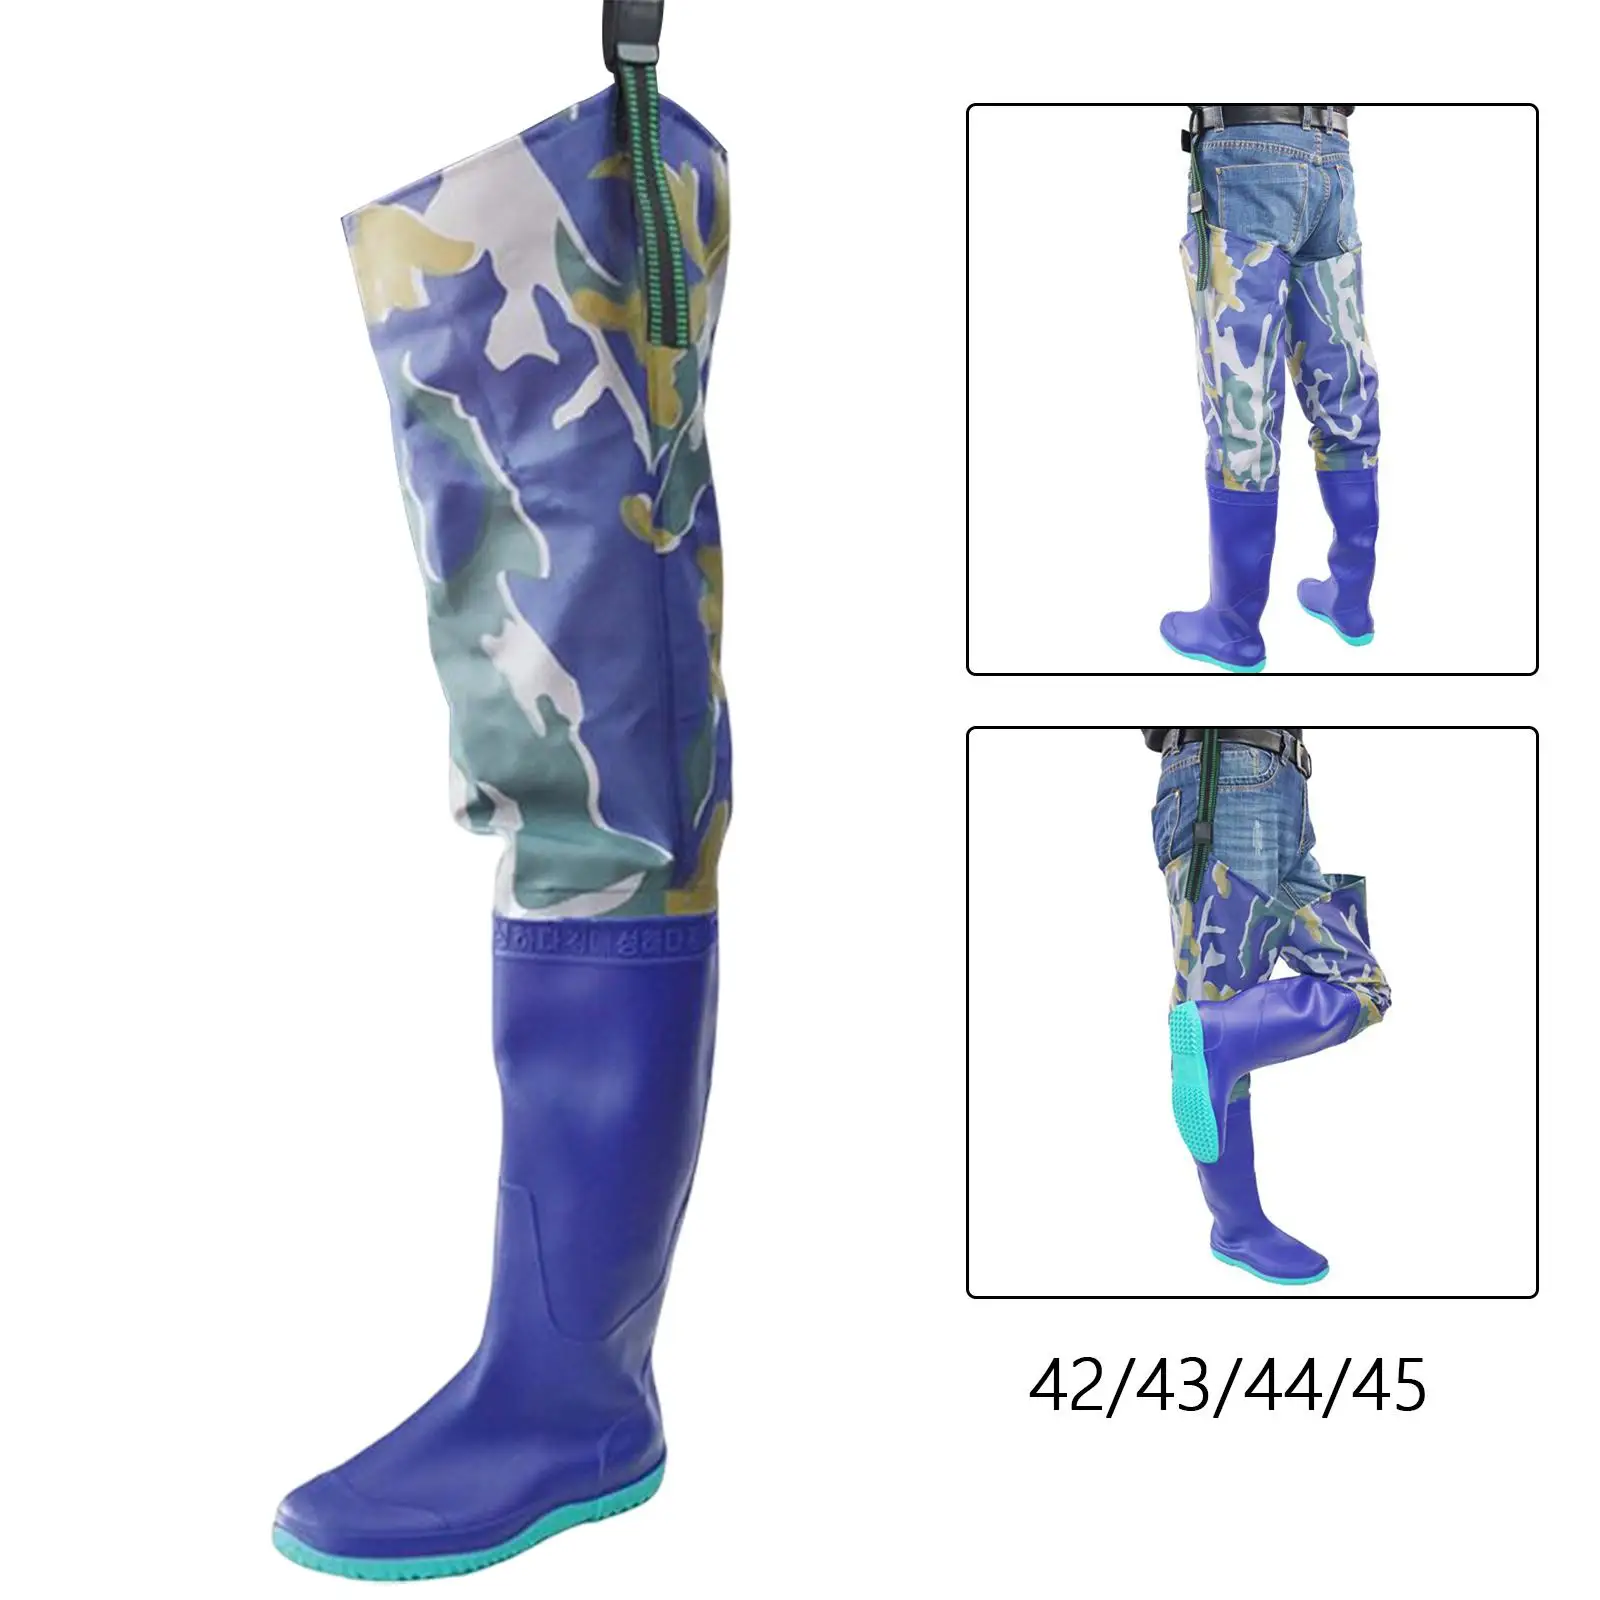 Hip Waders Waterproof Hip Boots Non Slip Men Women Wading Pants Bootfoot Wellies Thigh Waders Wading Trousers for Fishing Wading